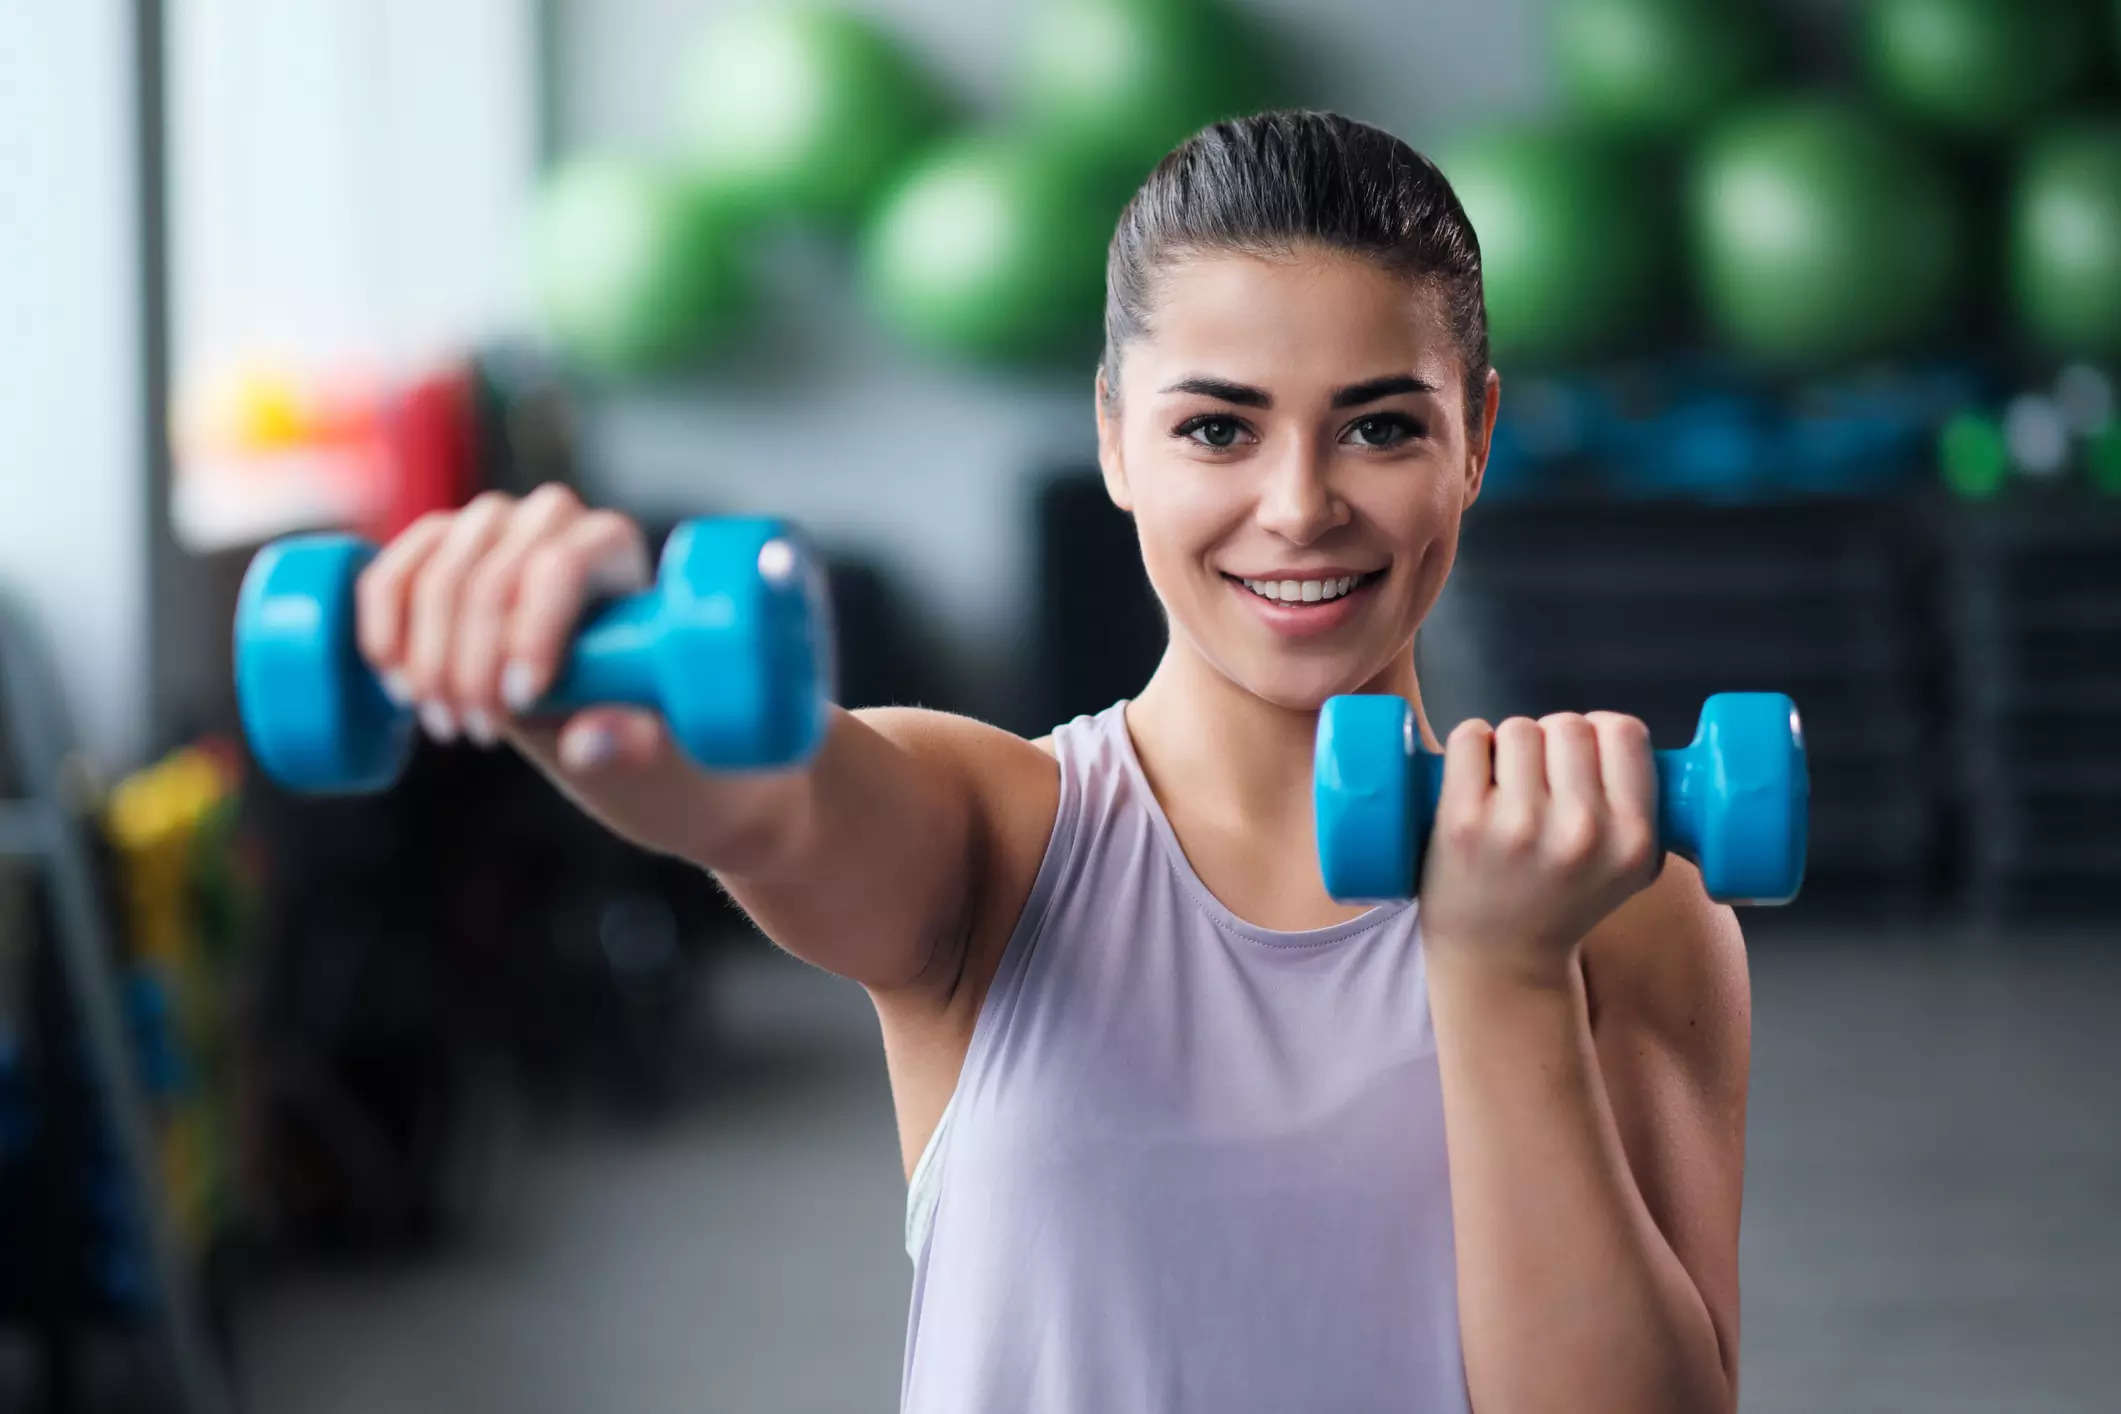 With this researchers concluded that lowering a heavy dumbbell slowly once or six times a week is good enough to build muscle strength